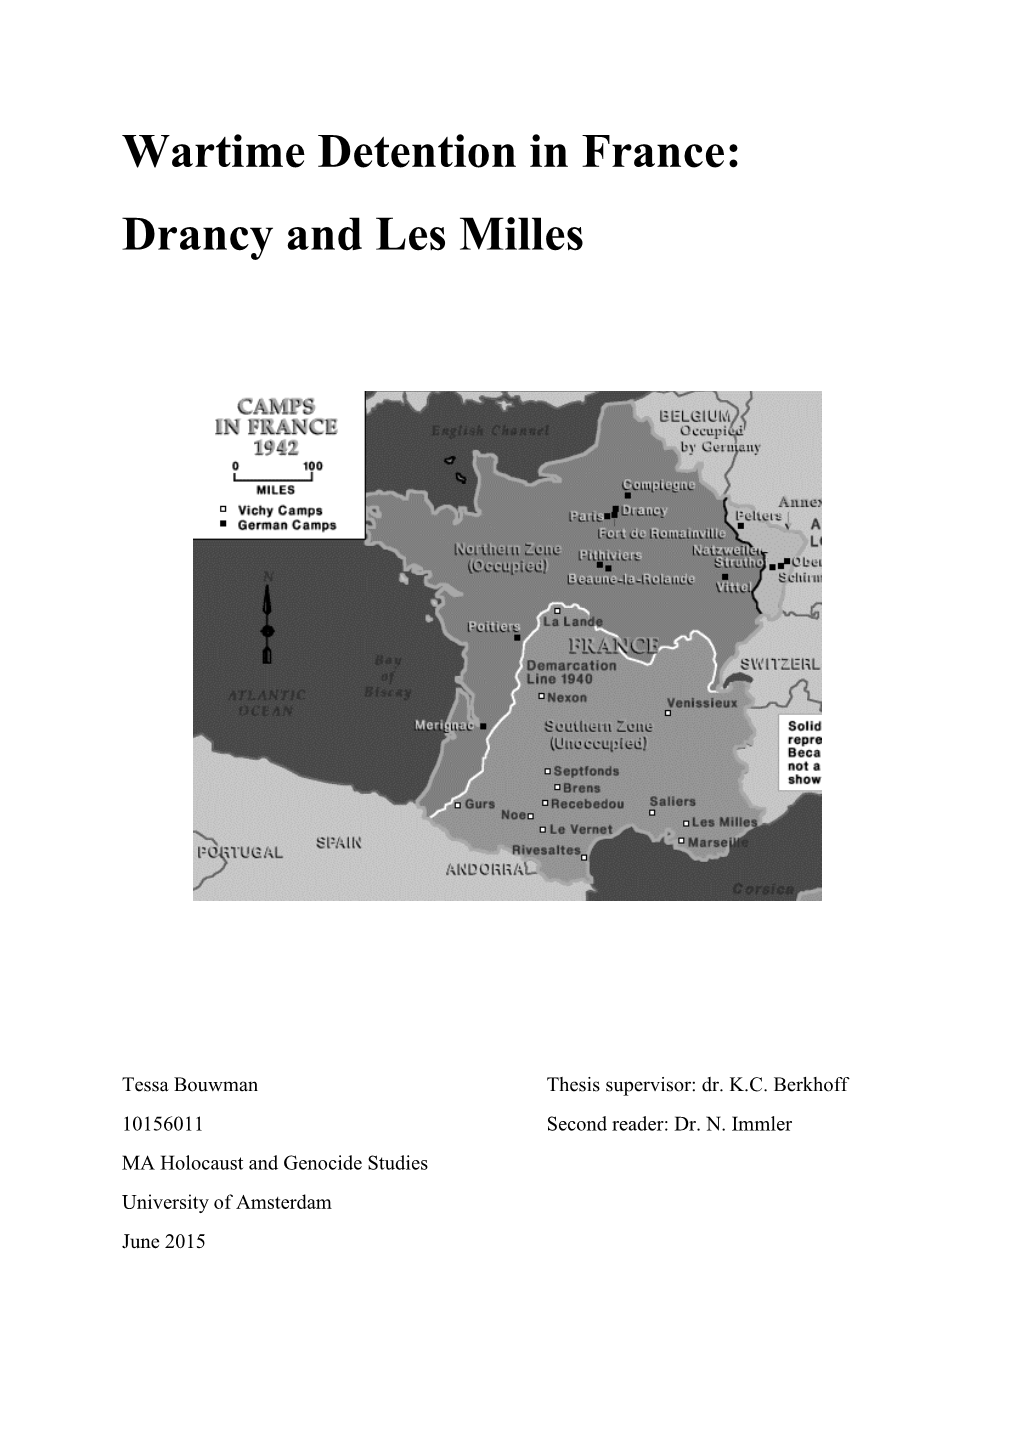 Wartime Detention in France: Drancy and Les Milles